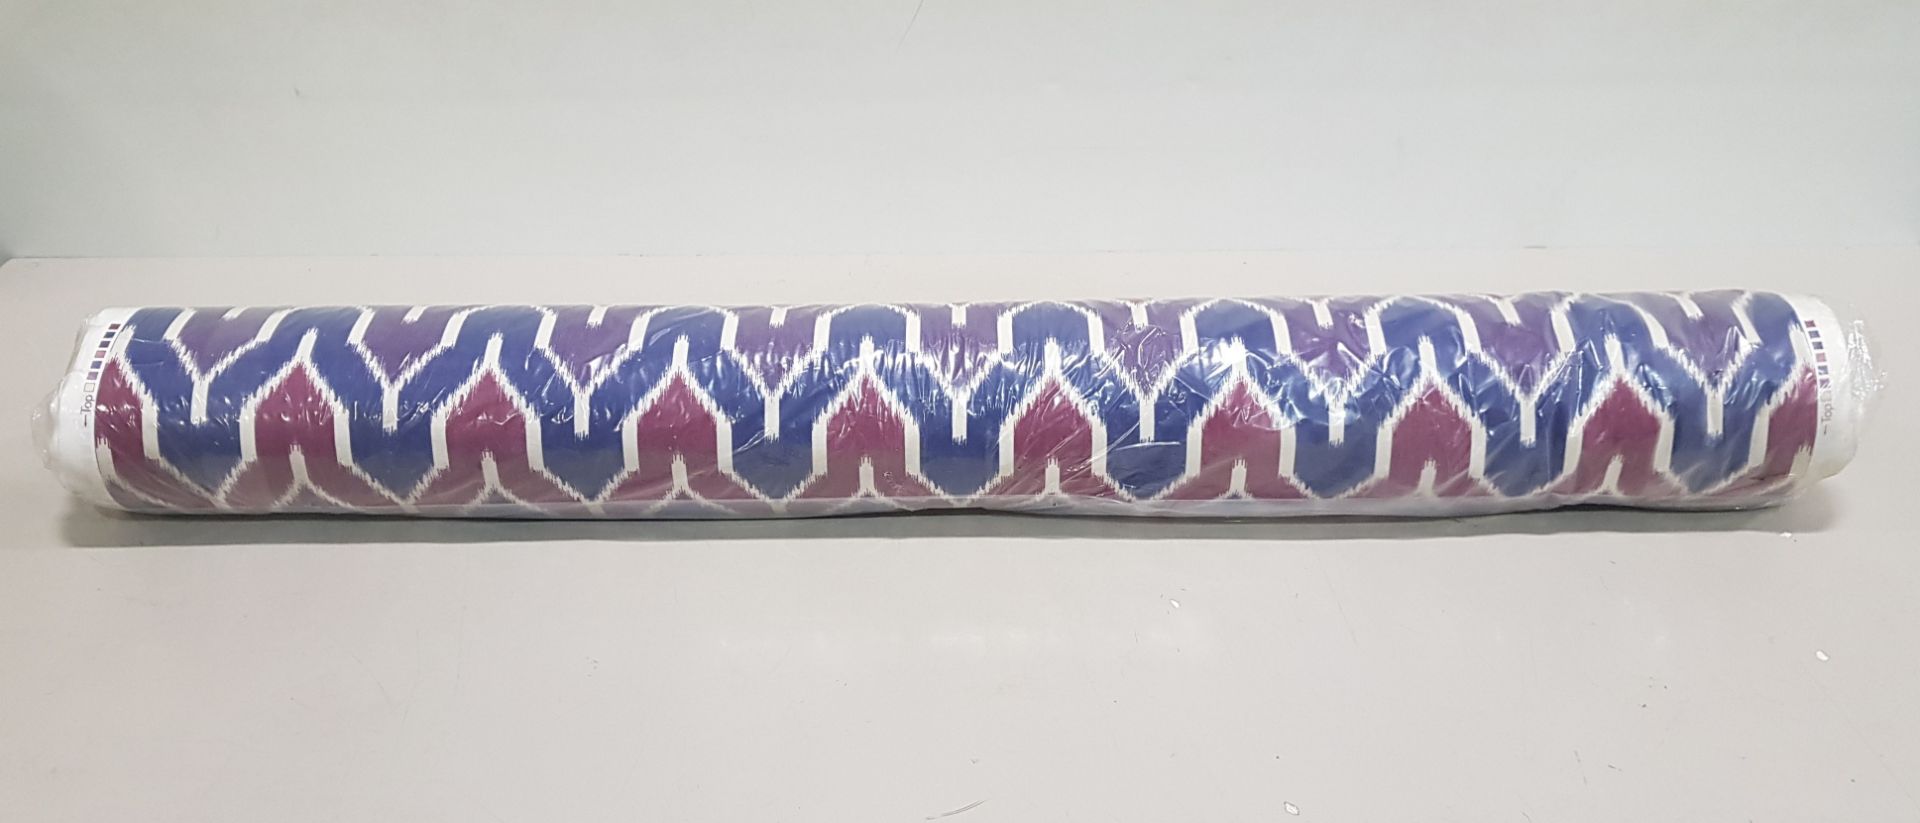 1 X ROLL OF FABRIC IN PURPLE RED AND BLUE WAVY DESIGN - LENGTH 50 M - RRP £12.99 / M - TOTAL £649.